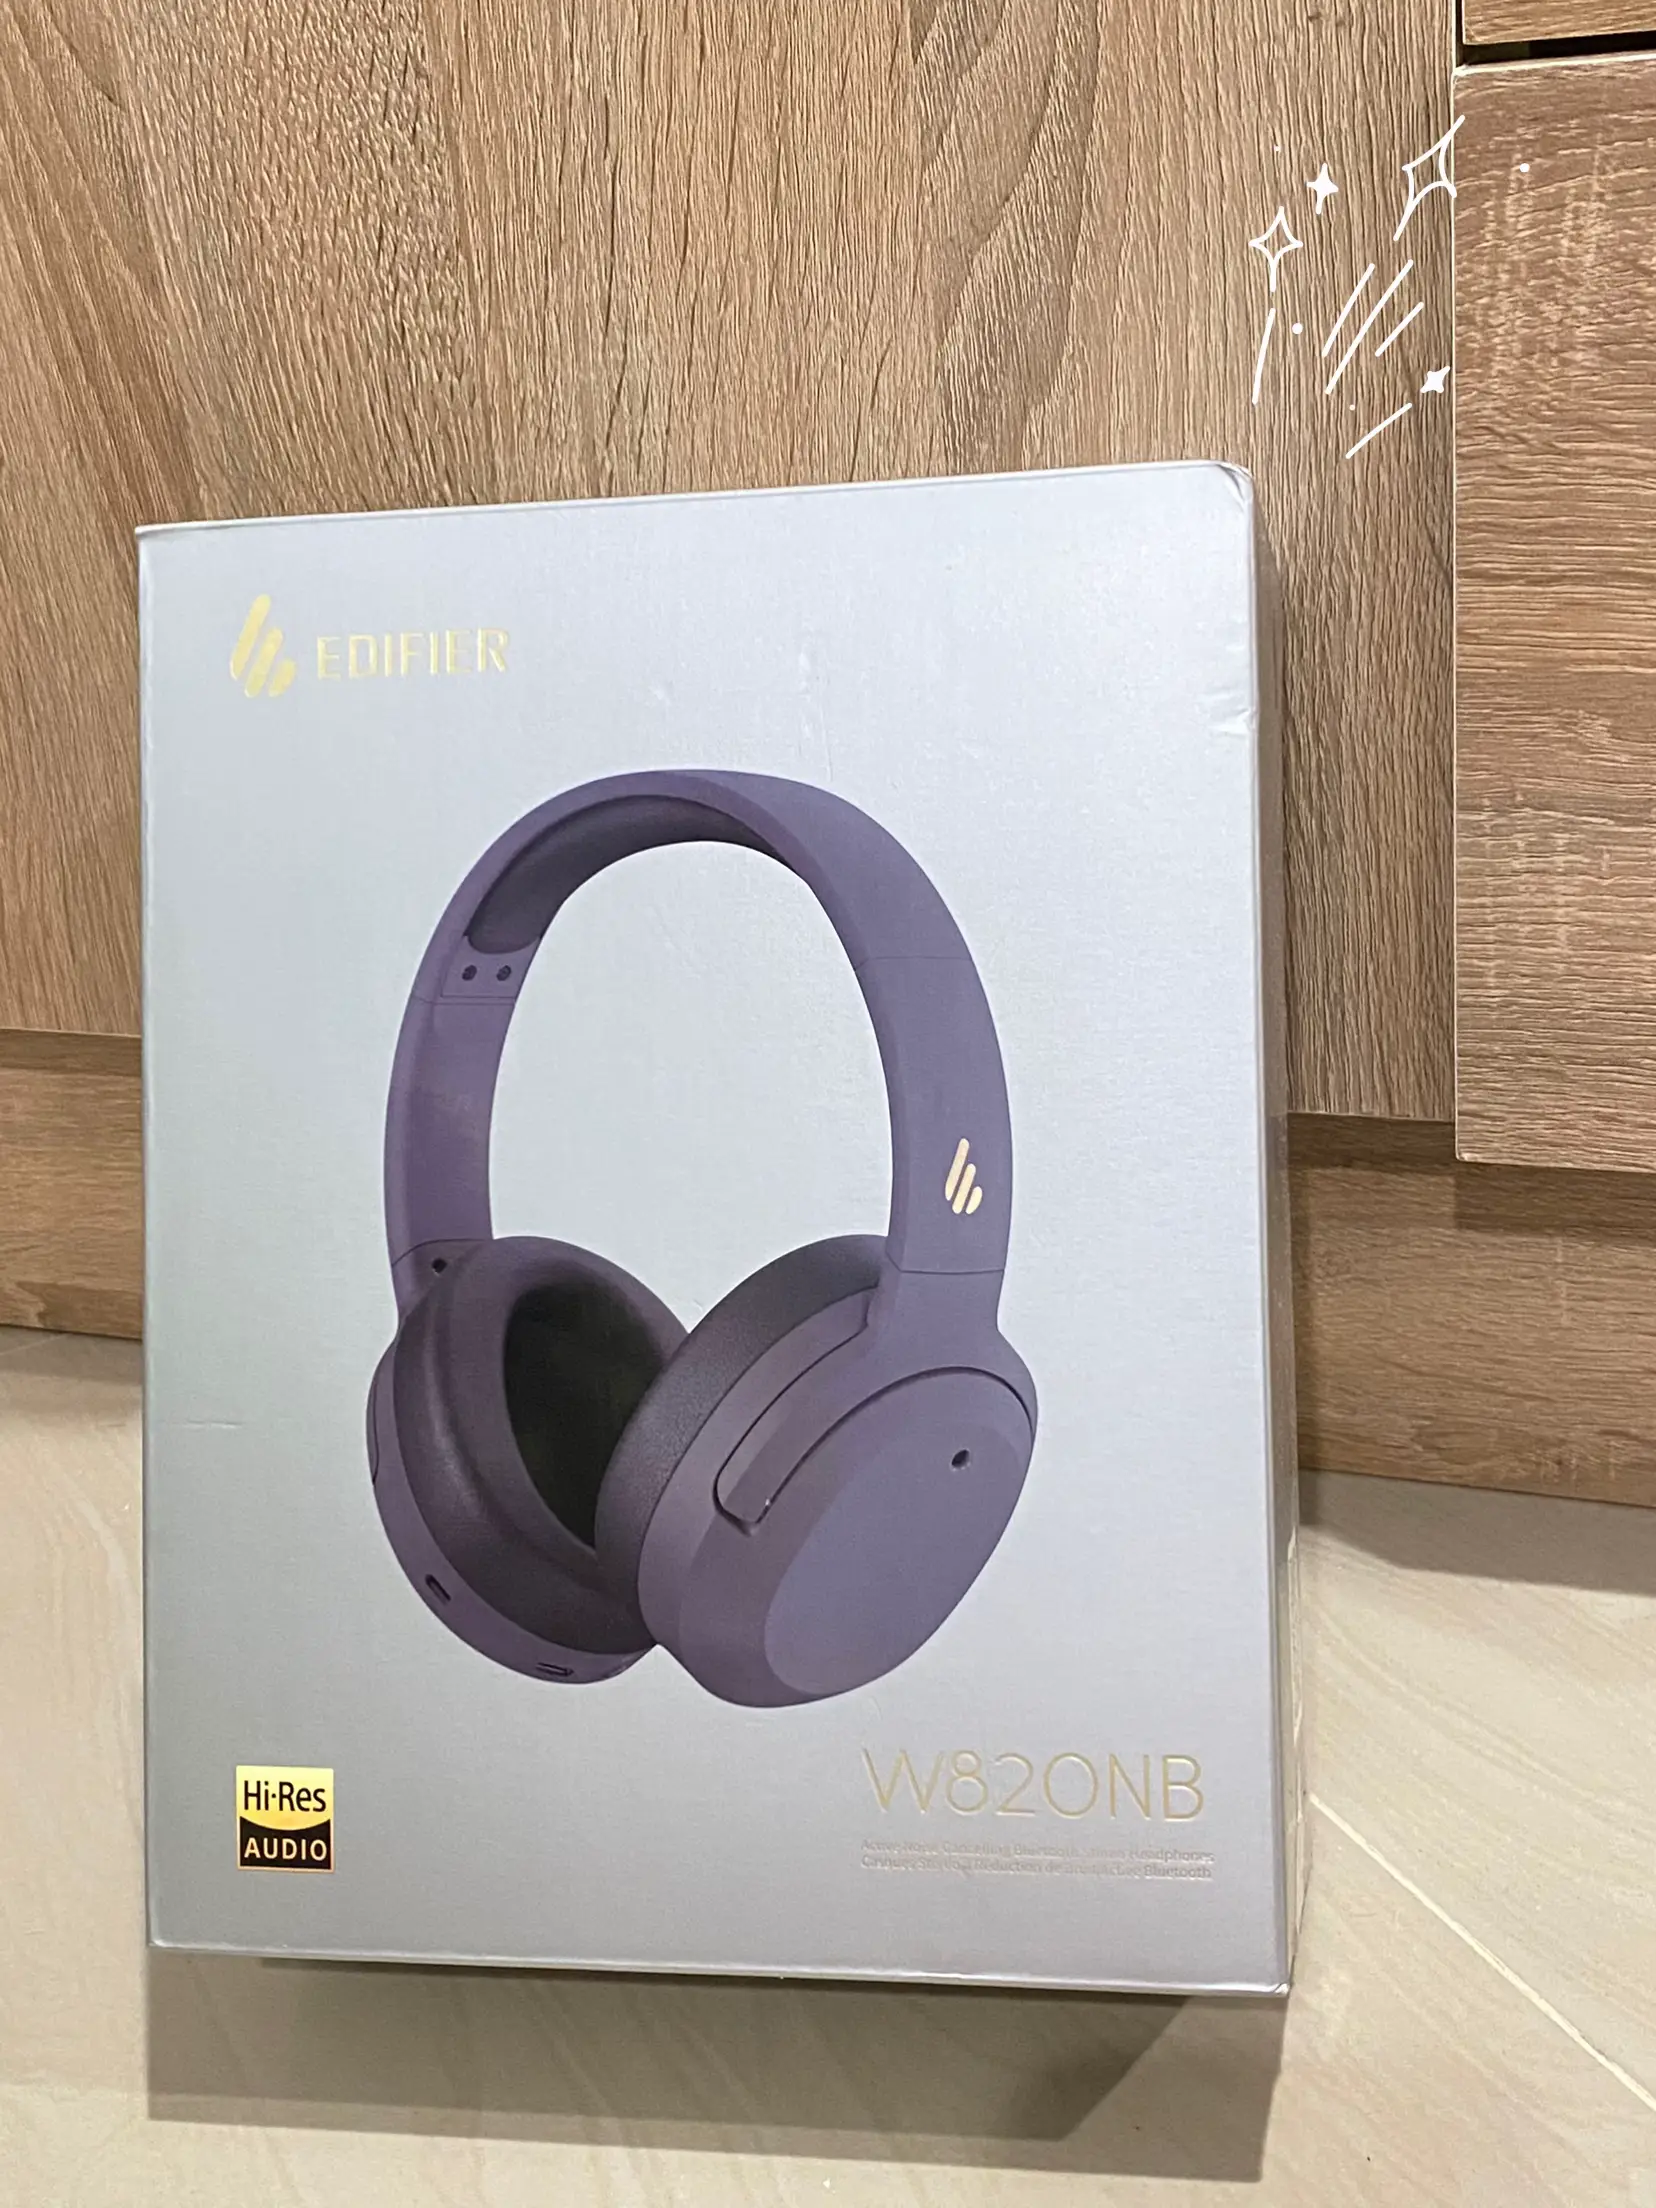 ✨ Edifier W820nb Ear Cover Headphones Review 🎧 Headphones that don't just  have a pretty design!, Gallery posted by Kanbabe